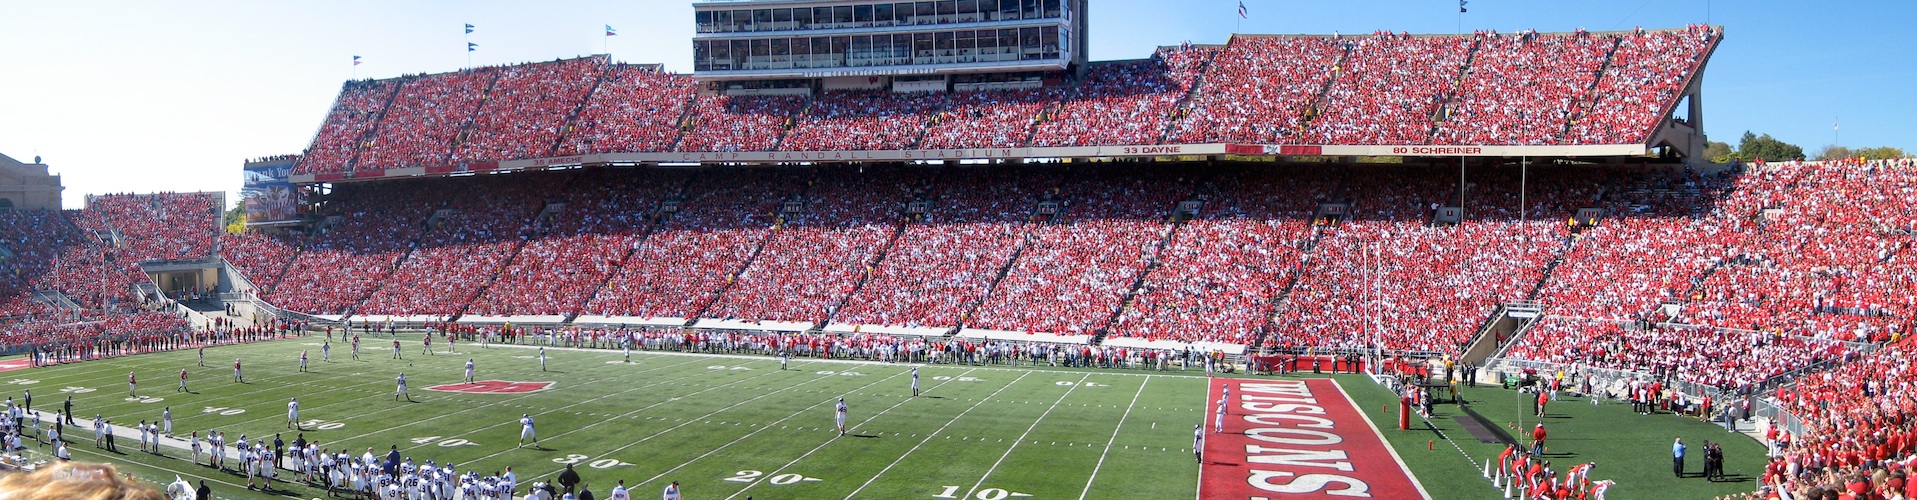 Camp Randall on football Saturday in Madison, Wisconsin.